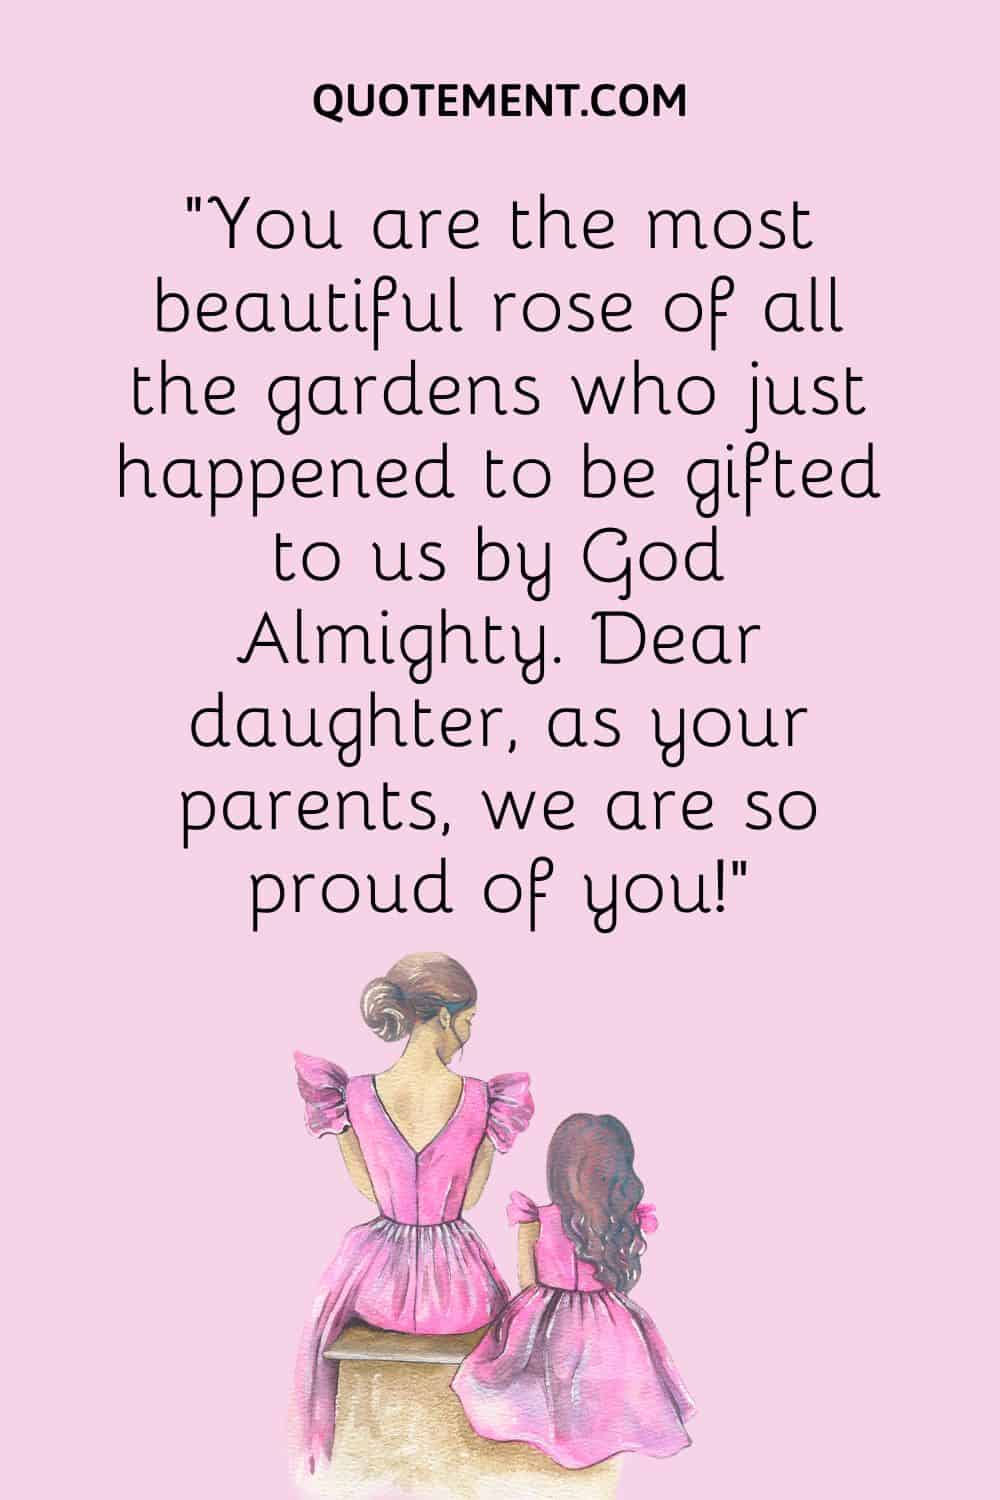 “You are the most beautiful rose of all the gardens who just happened to be gifted to us by God Almighty. Dear daughter, as your parents, we are so proud of you!”